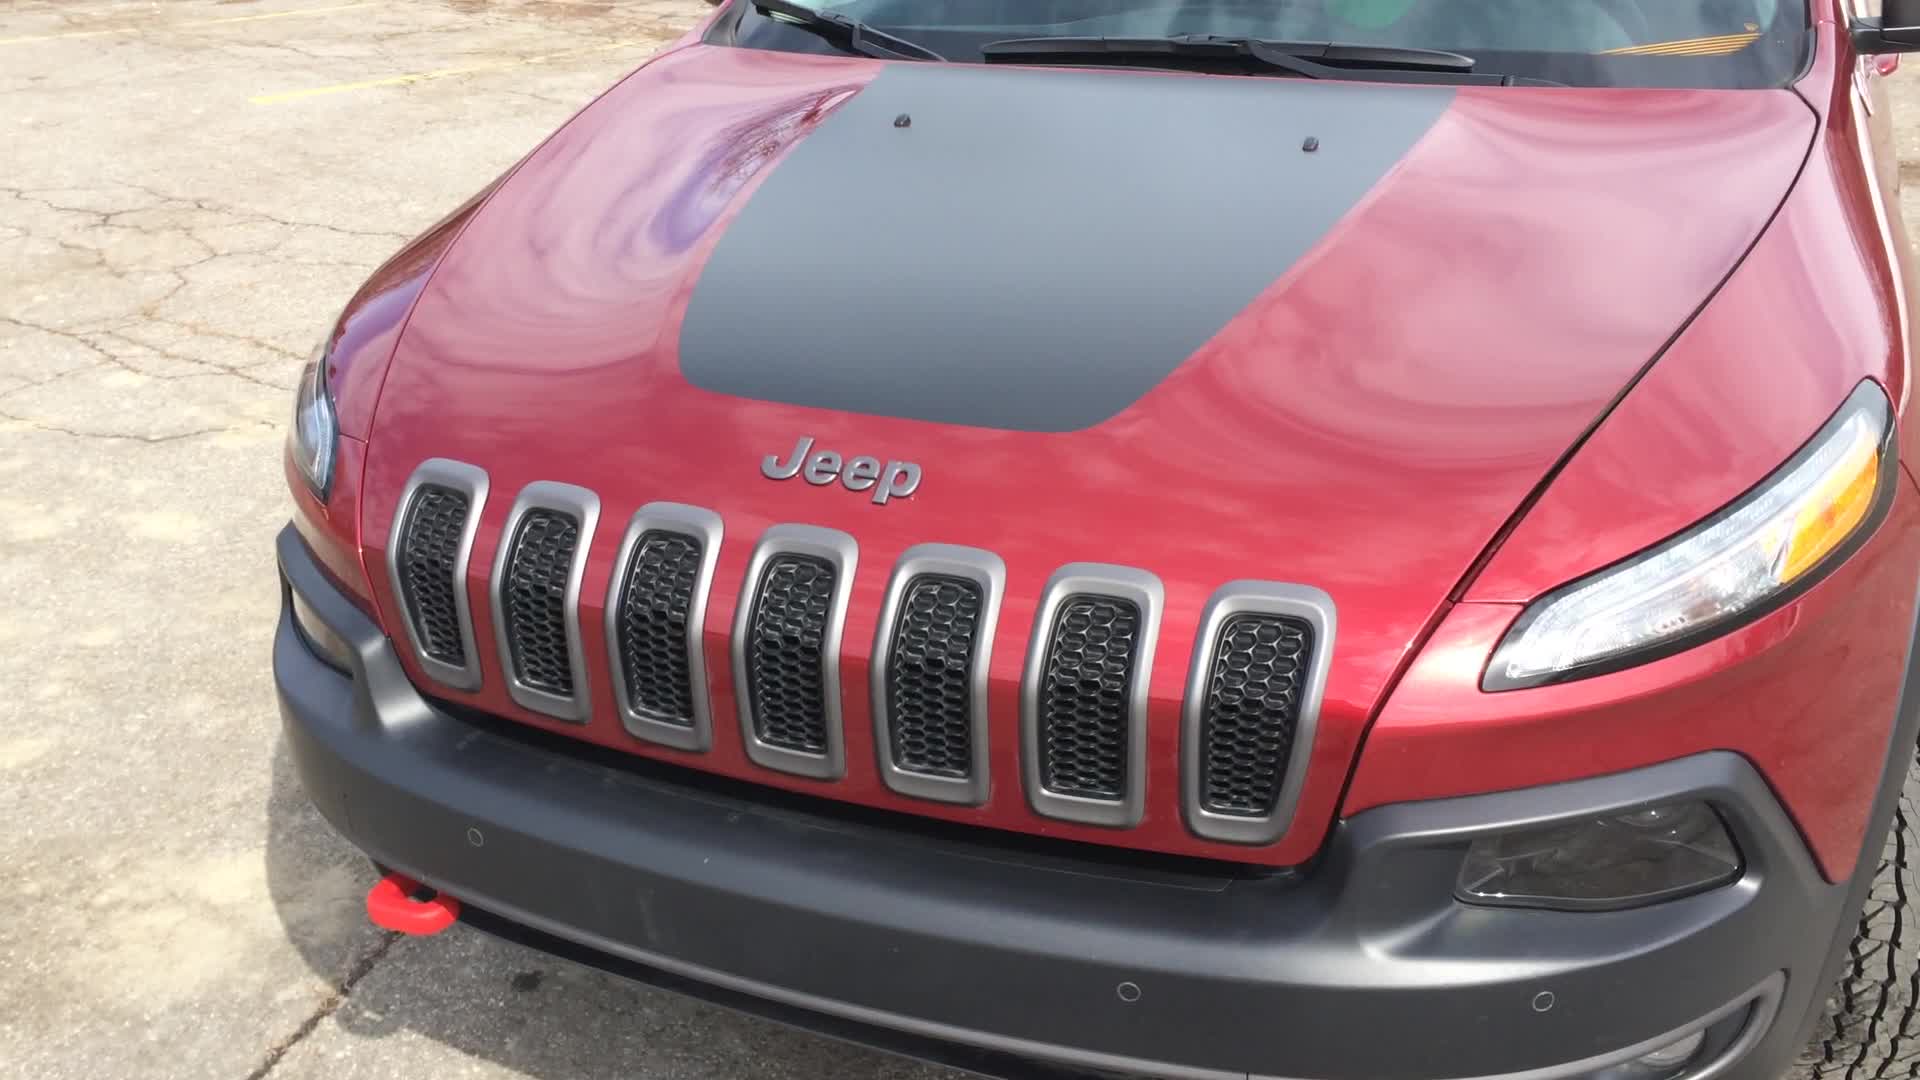 2014 Jeep Cherokee Easter Egg Under The Hood Autoblog Short Cuts